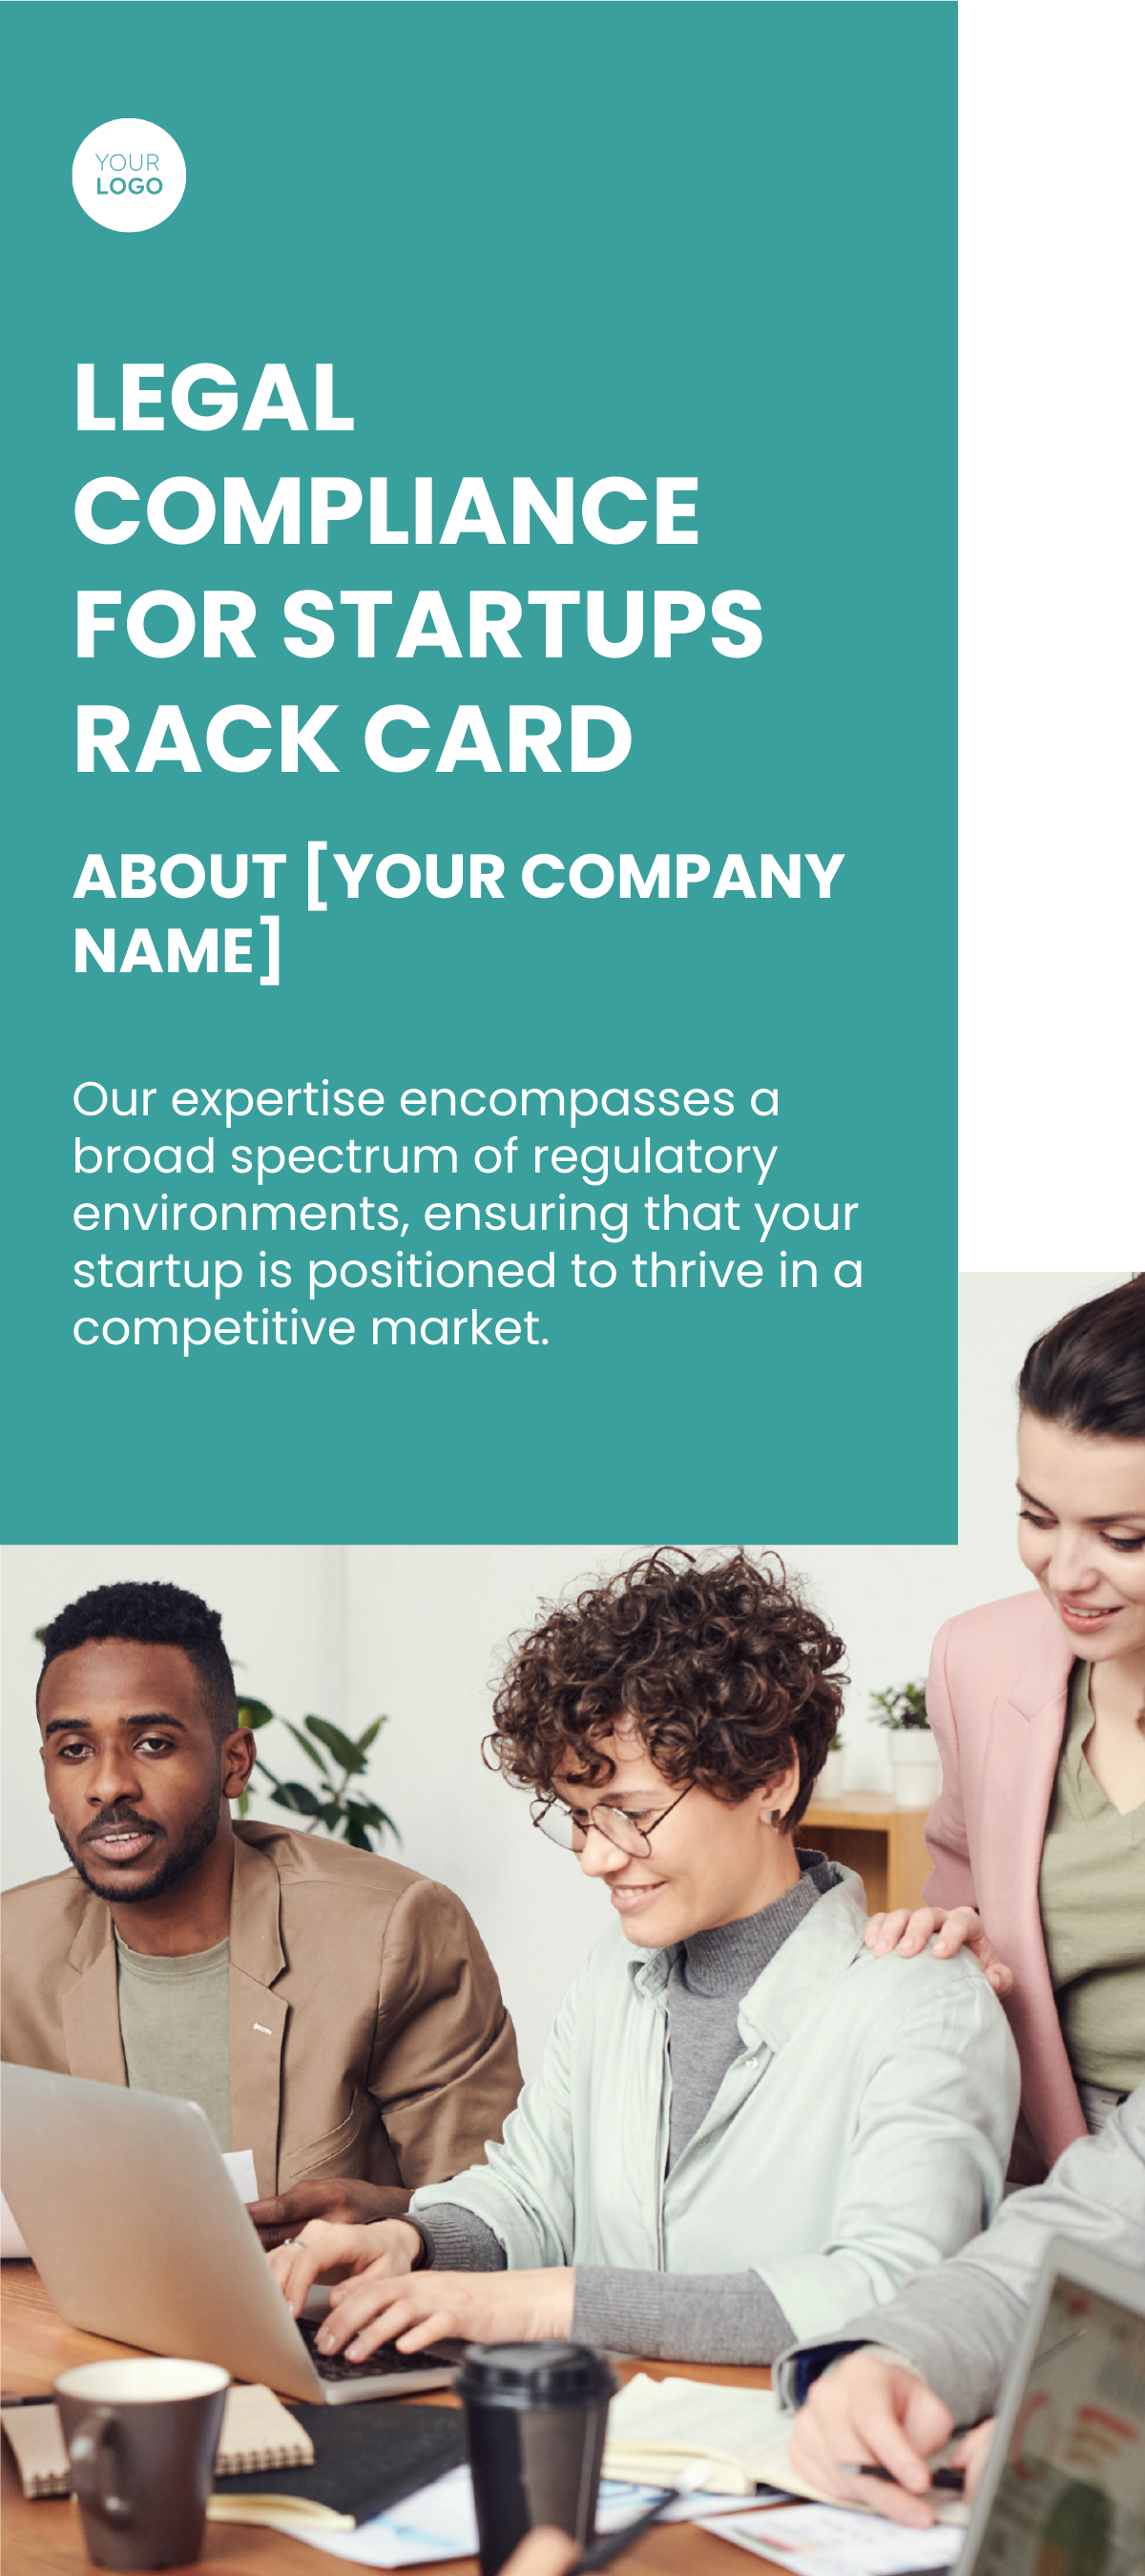 Free Legal Compliance for Startups Rack Card Template